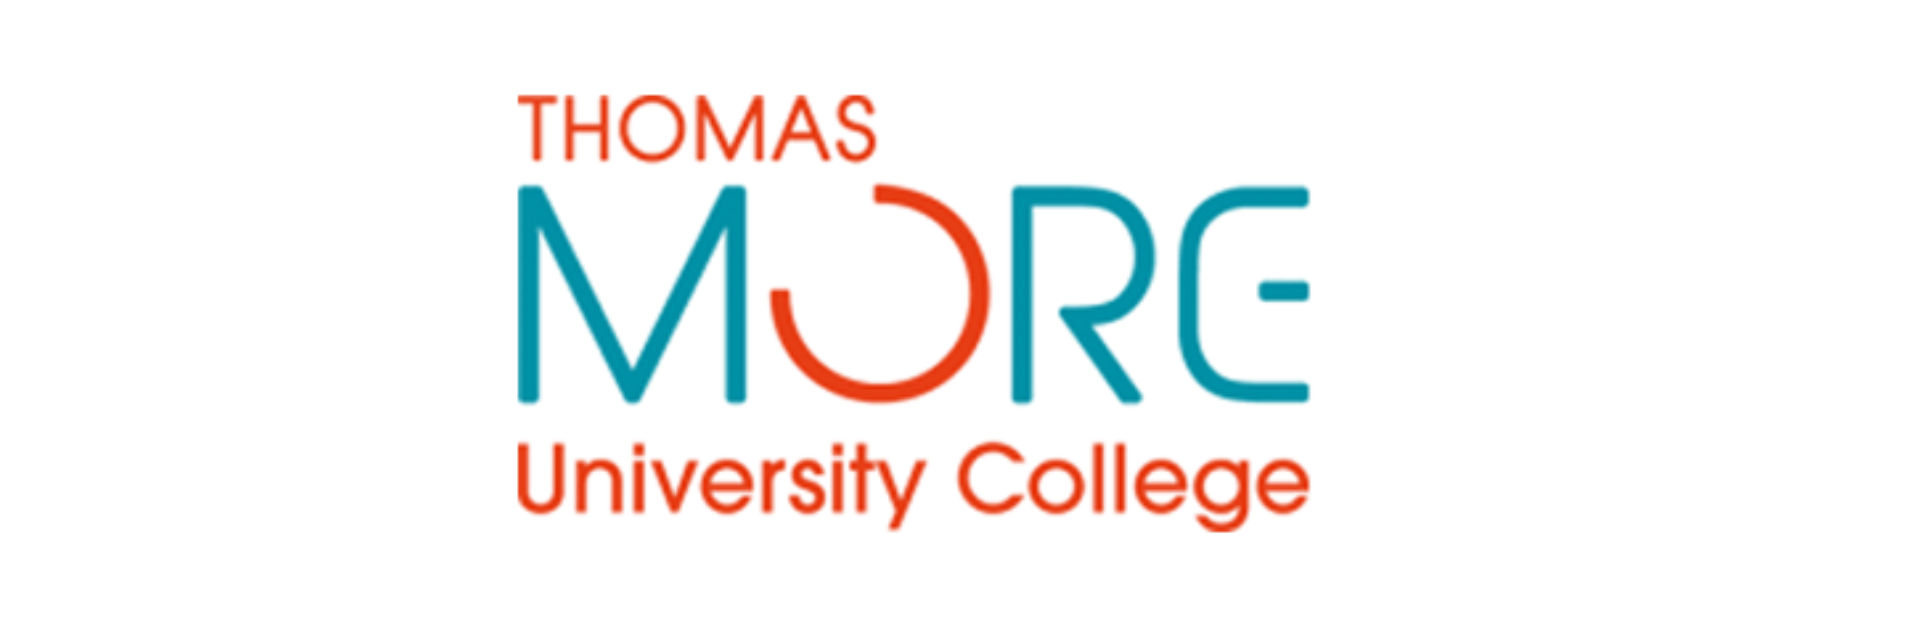 Thomas More University of Applied Sciences